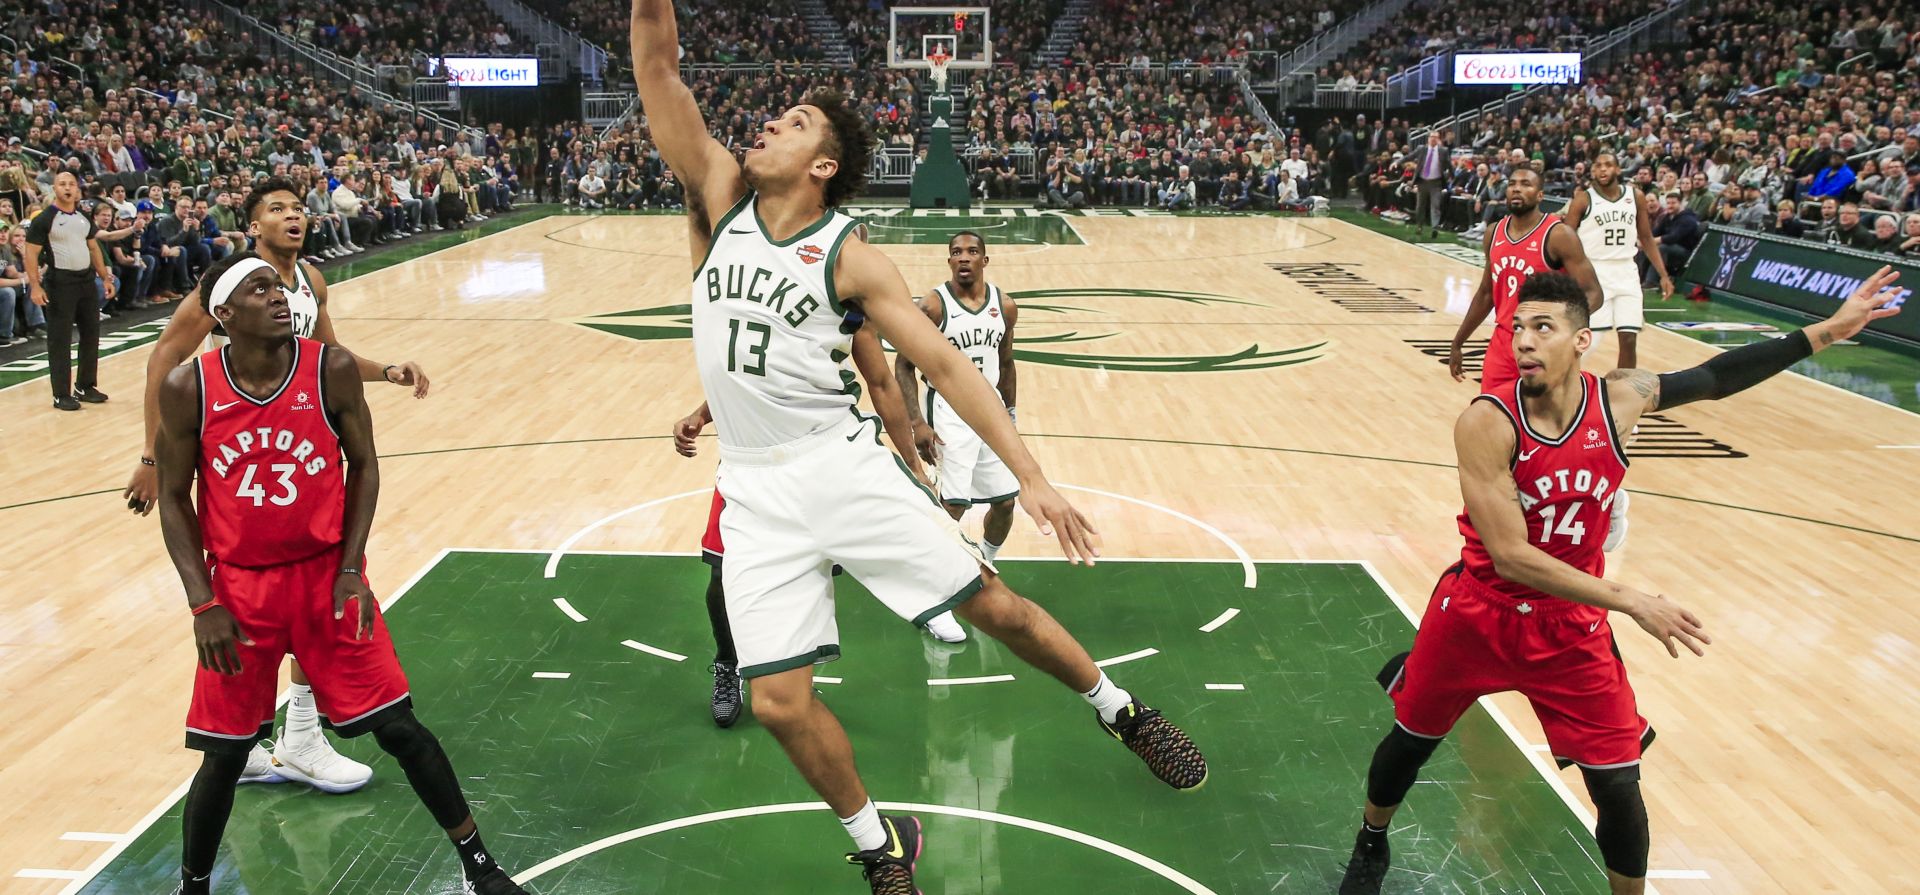 epa07264256 Toronto Raptors guard Danny Green (R) and Toronto Raptors forward Pascal Siakam of Cameroon (L) watch as Milwaukee Bucks guard Malcolm Brogdon (C) scores during the NBA game between the Toronto Raptors and the Milwaukee Bucks at Fiserv Forum in Milwaukee, Wisconsin, USA, 05 January 2019.  EPA/TANNEN MAURY SHUTTERSTOCK OUT